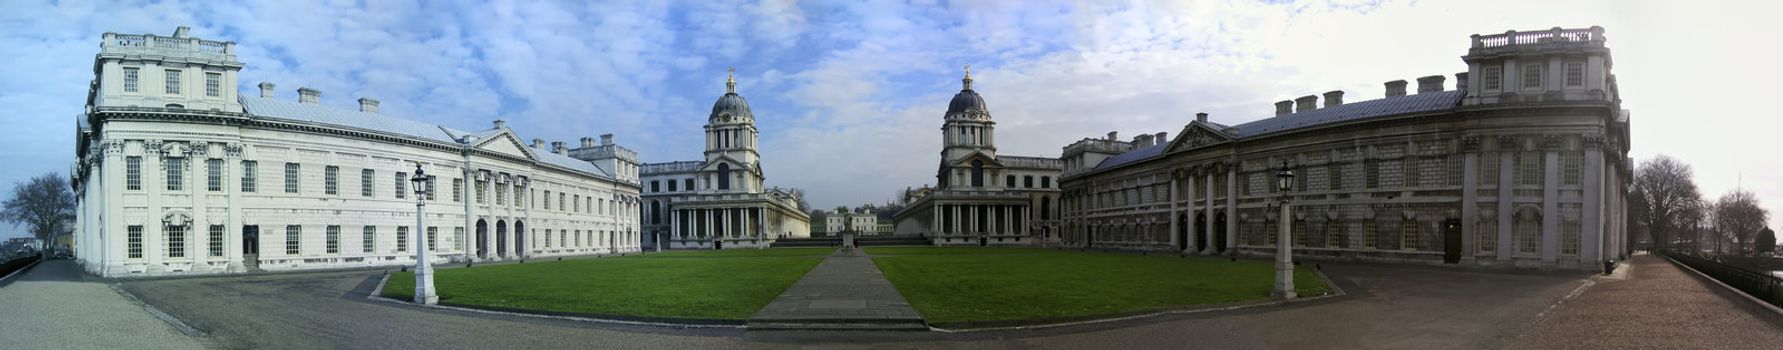 Greenwich architecture Naval College, University and maritime museum in Greenwich, London